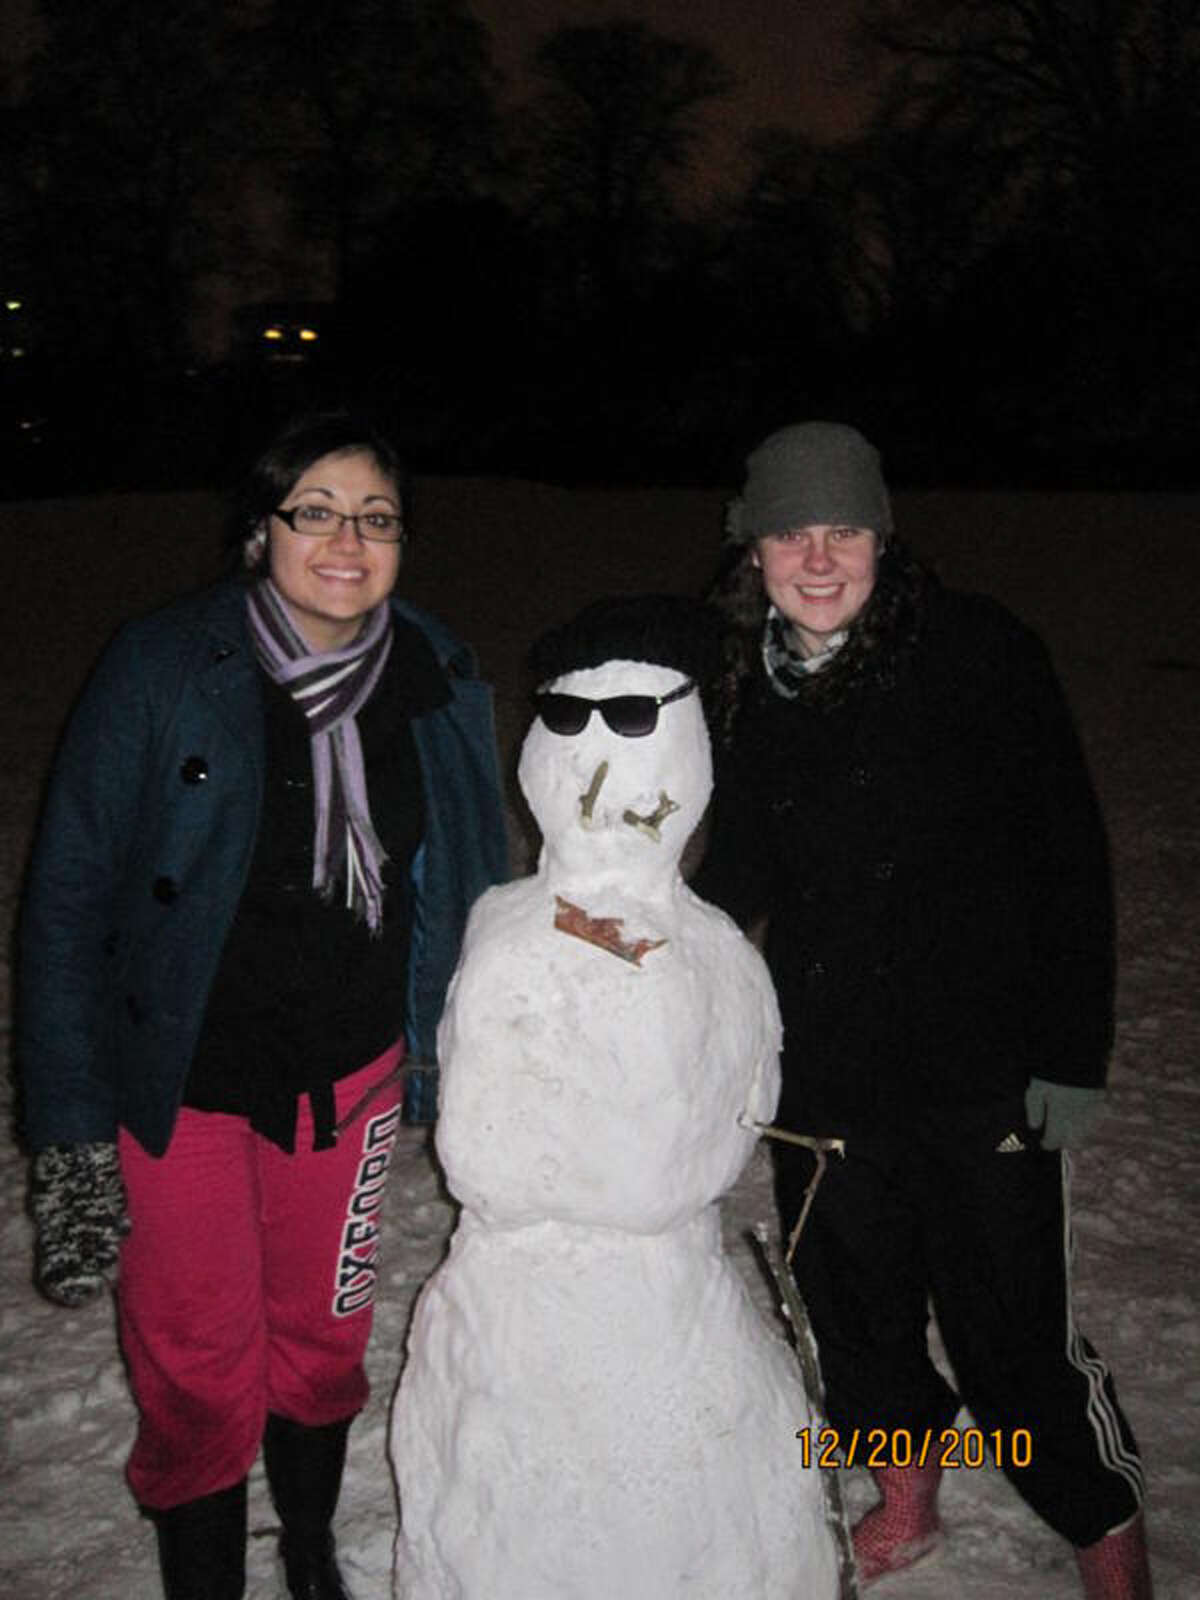 Briana Perez (left), a senior psychology student at St. Mary’s University, and Emily Scruggs, a junior English/communications arts major, pose with Heathrow the Snowman, who was named in honor of the closed airport in London.